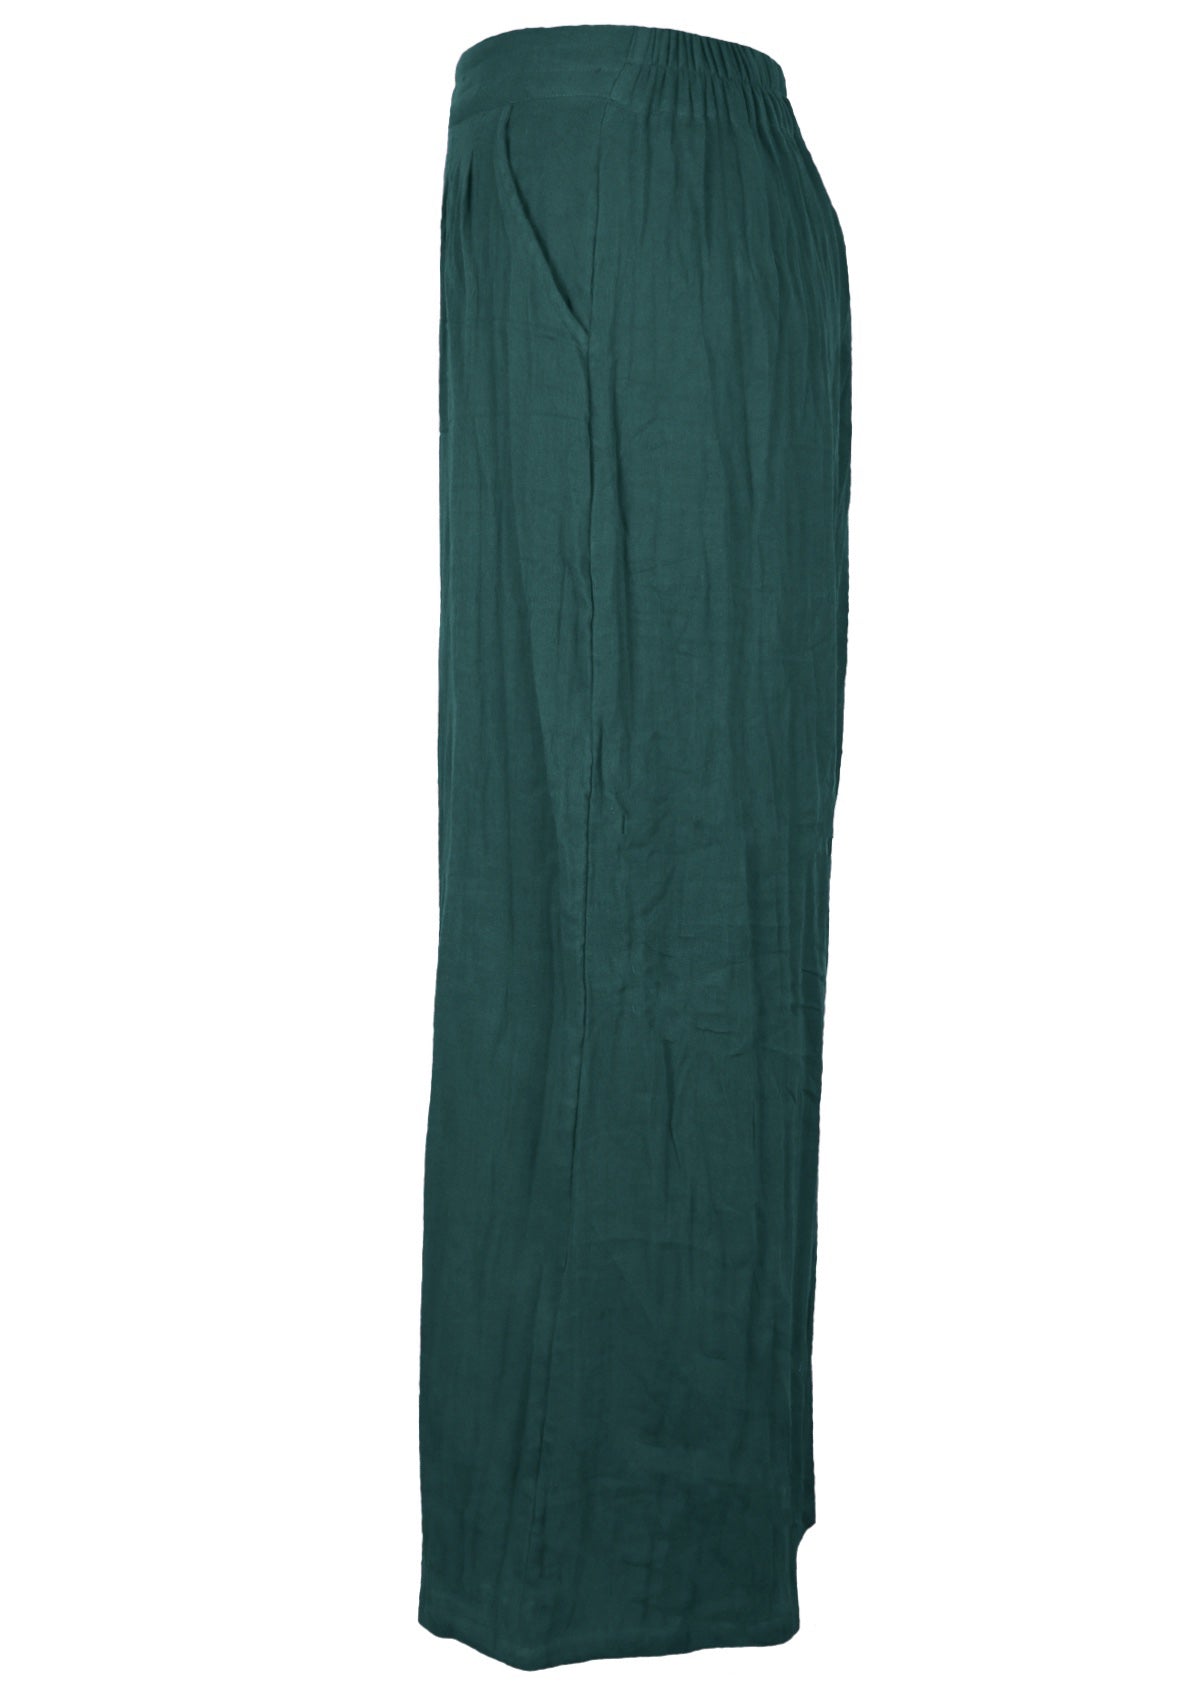 Lightweight cotton gauze form these wide leg pants with pockets